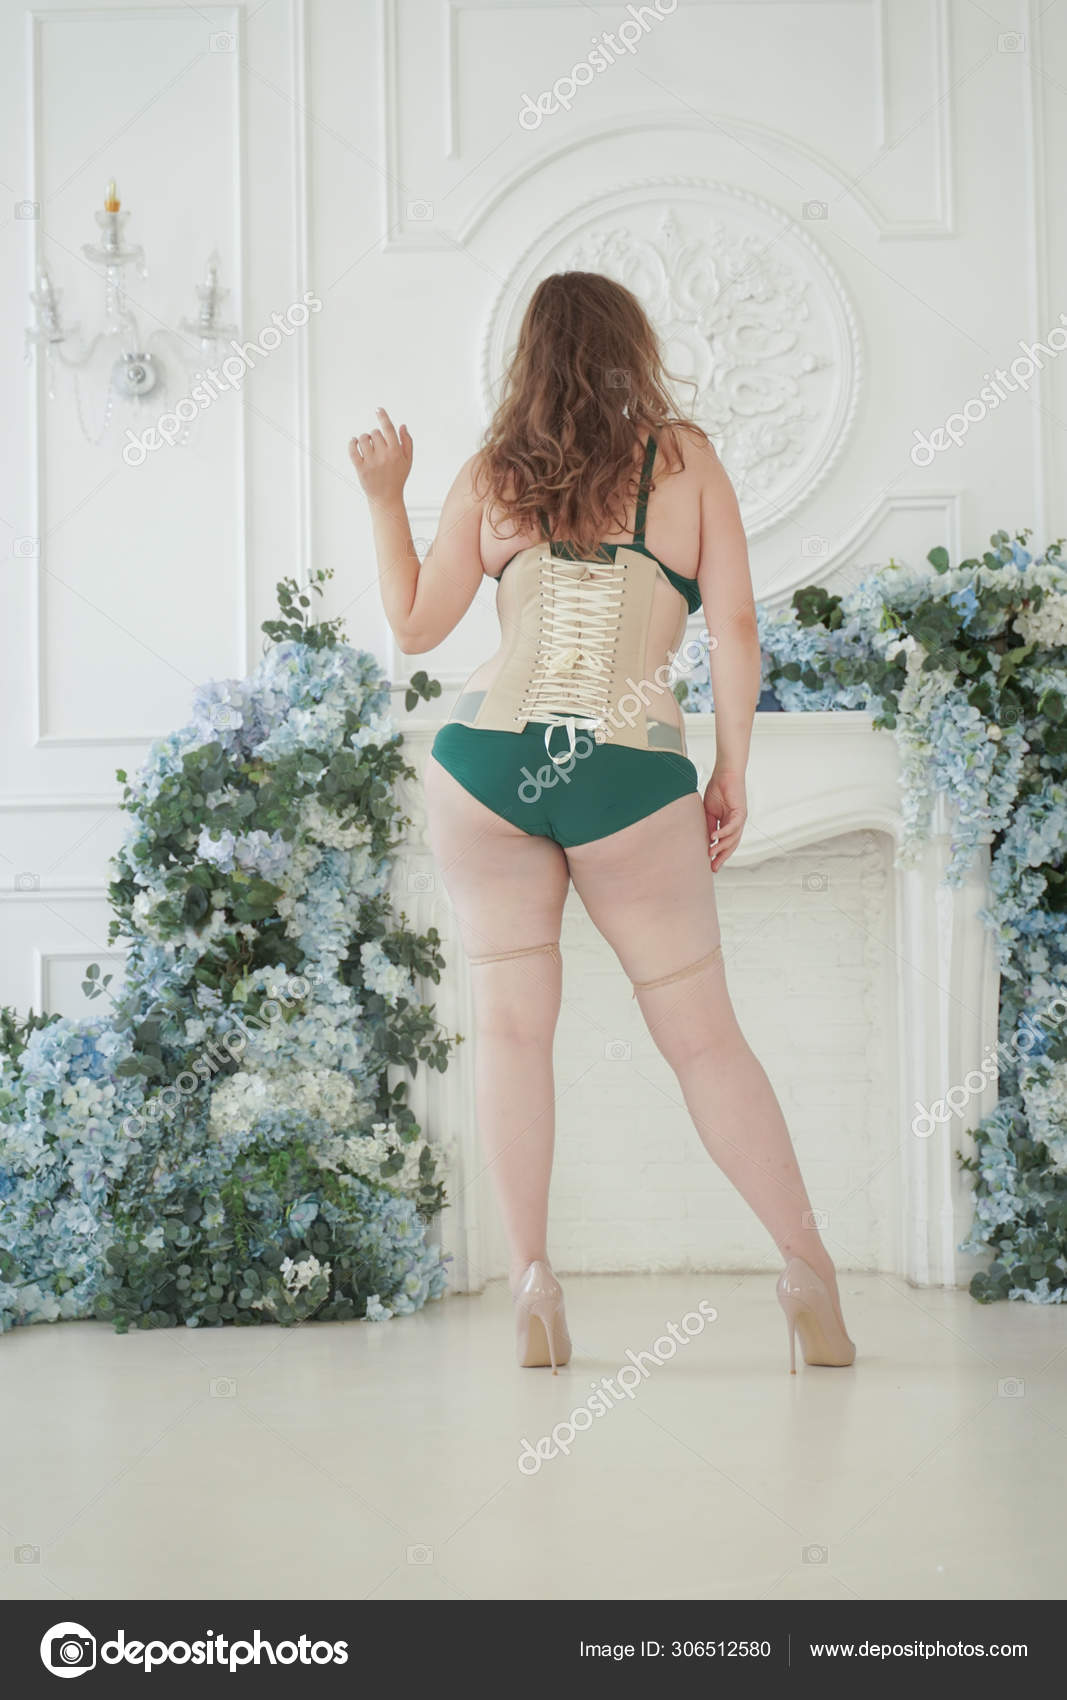 Beautiful plus size woman smiling happily in underwear